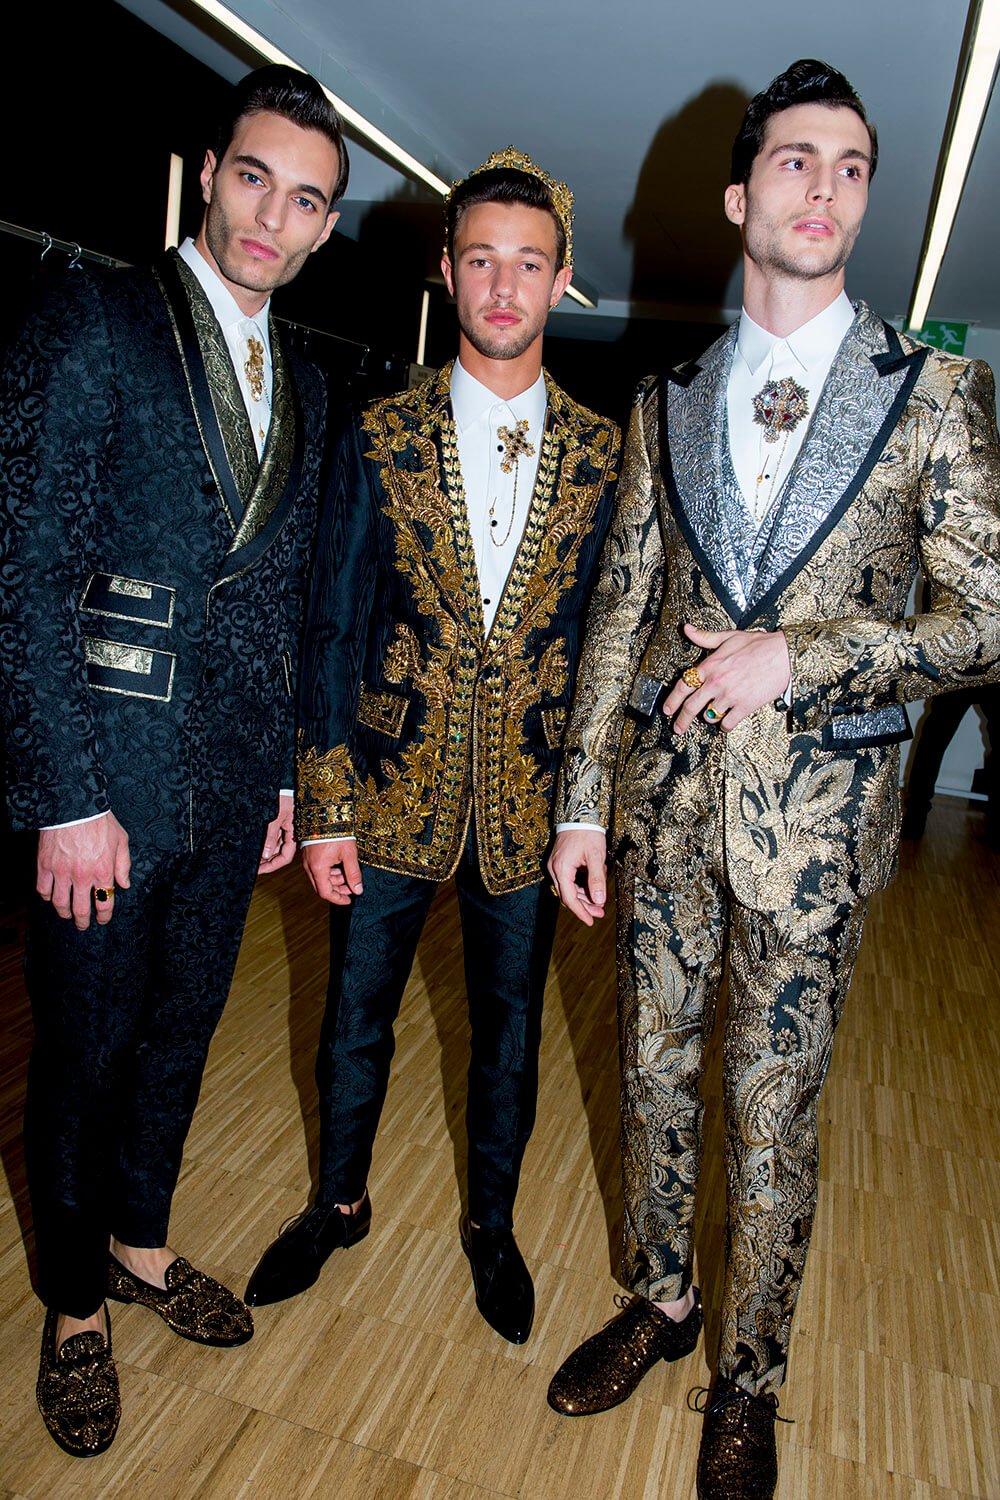 dolce and gabbana suits mens